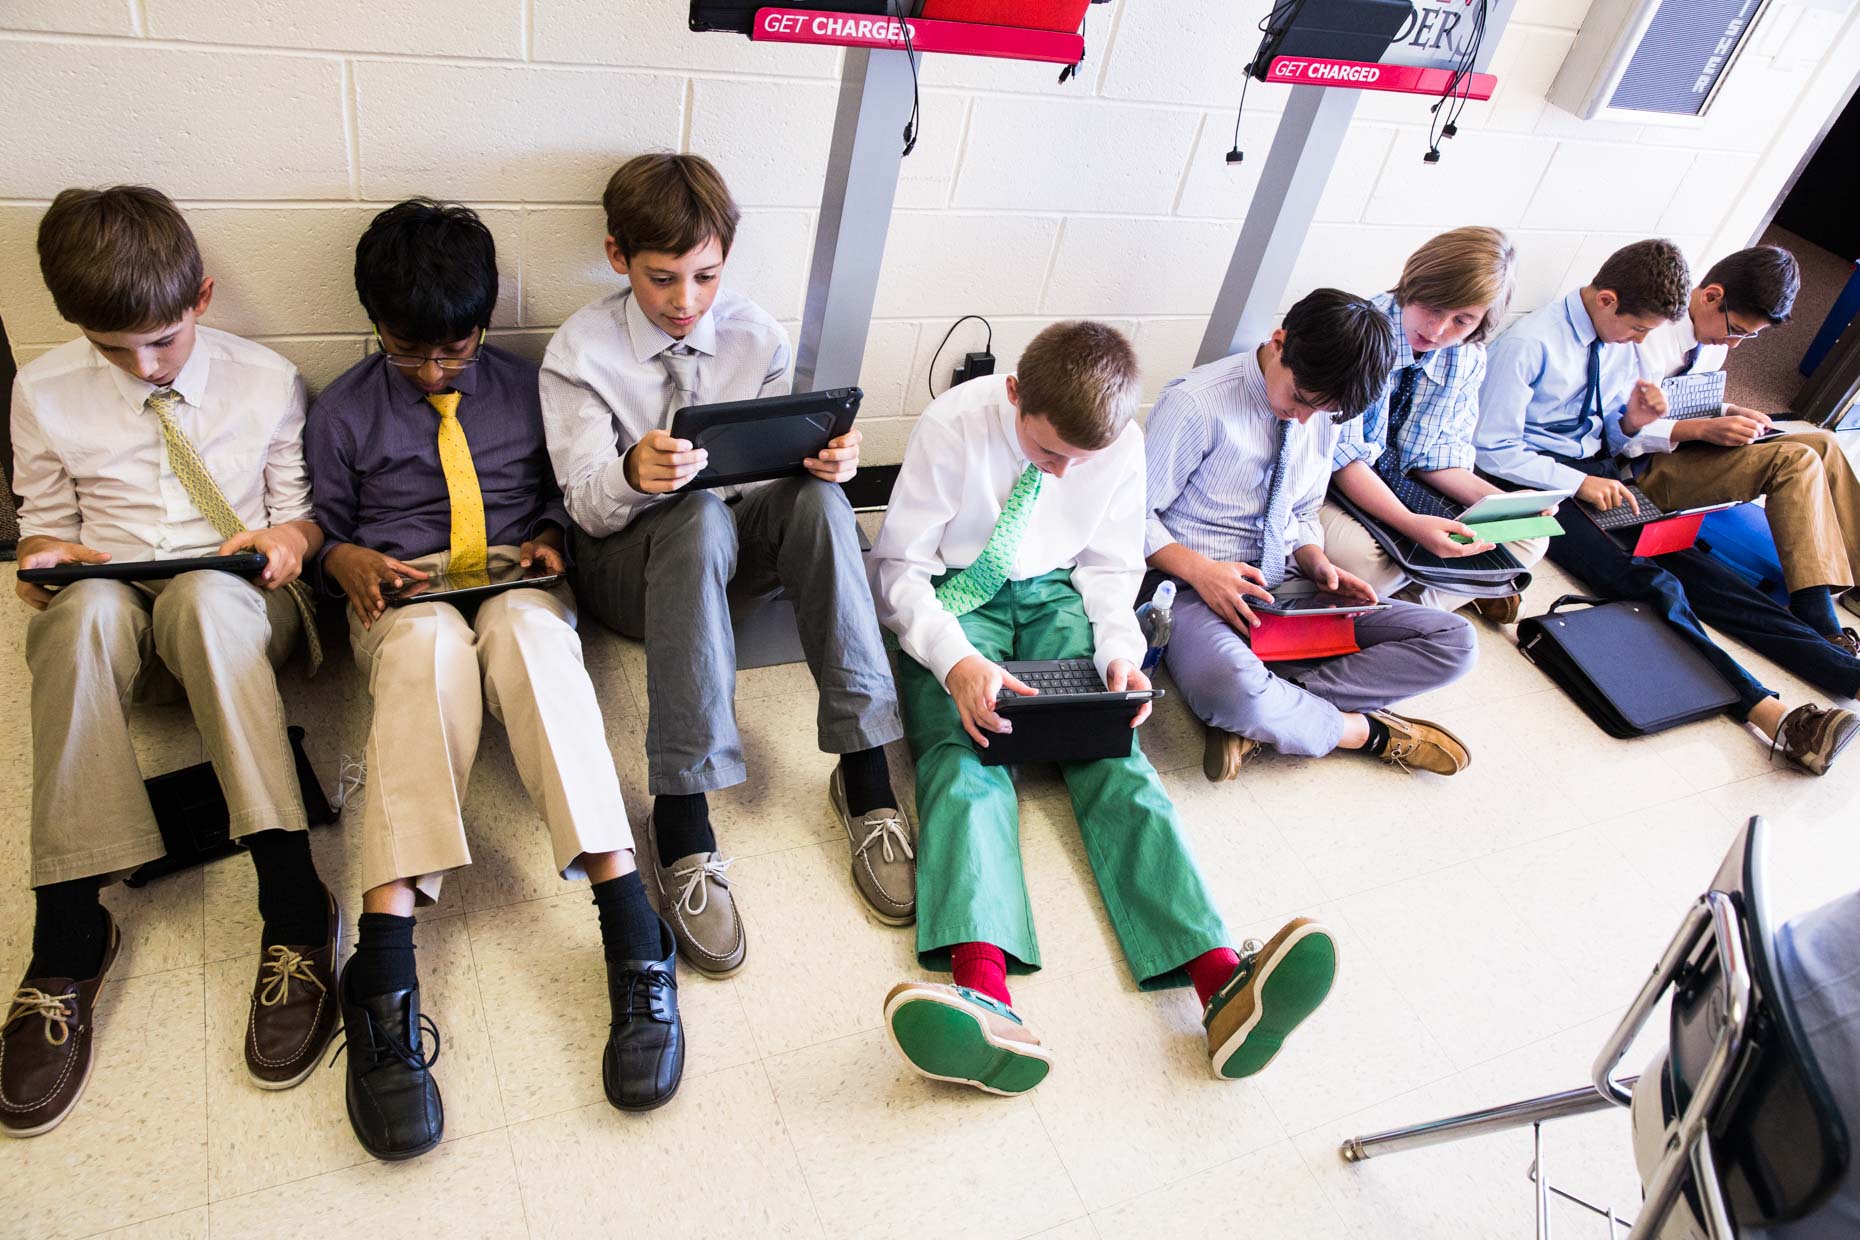 Students studying with laptops in school hallway.